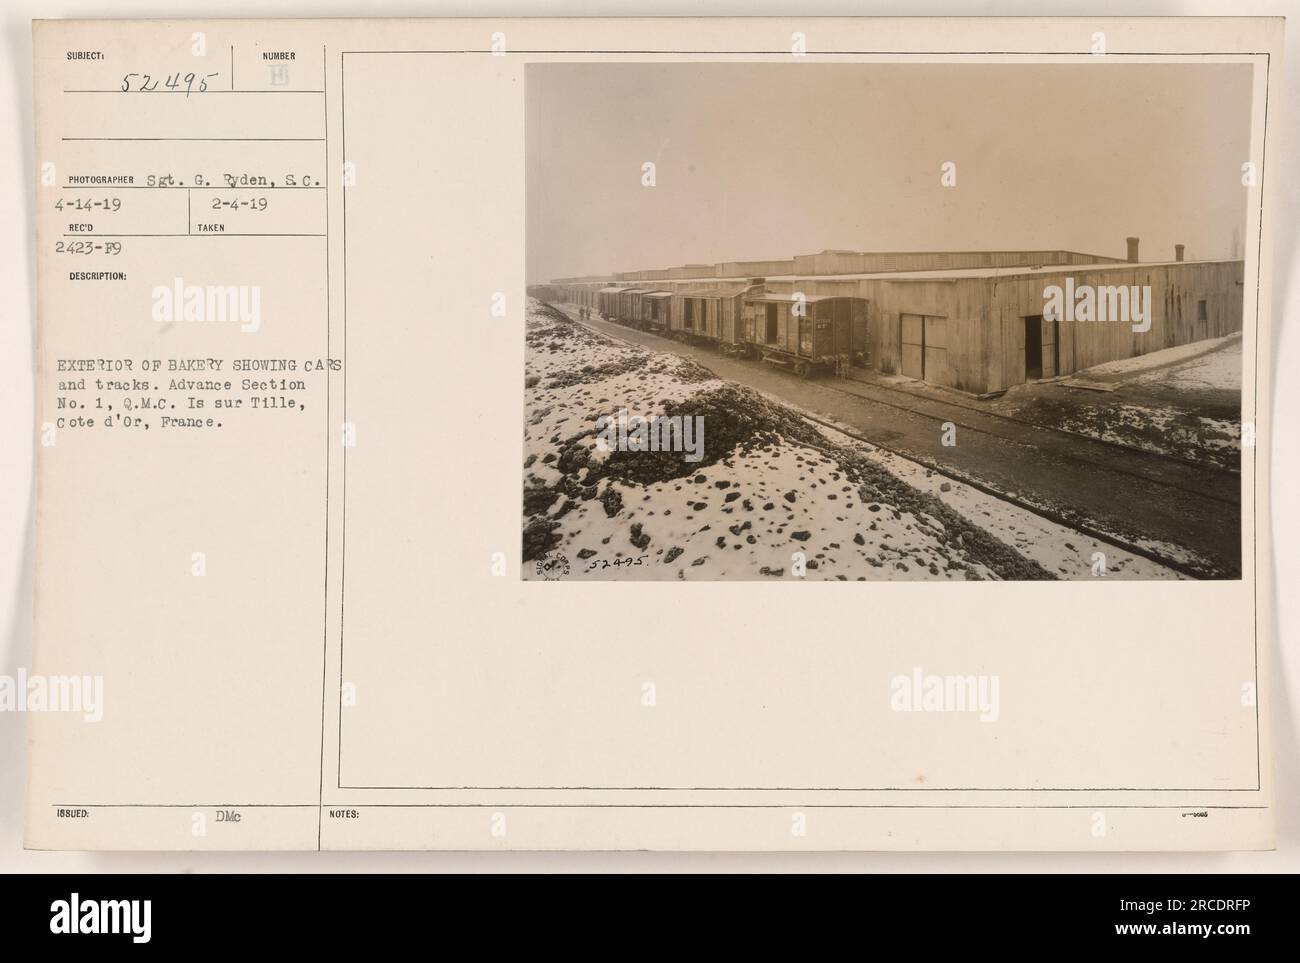 This photograph taken by Sgt. G. Ryden on April 14, 1919, shows the exterior of a bakery in Is sur Tille, Cote d'Or, France. The image features cars and tracks in front of the bakery, belonging to the Advance Section No. 1, Quartermaster Corps (Q.M.C). Stock Photo